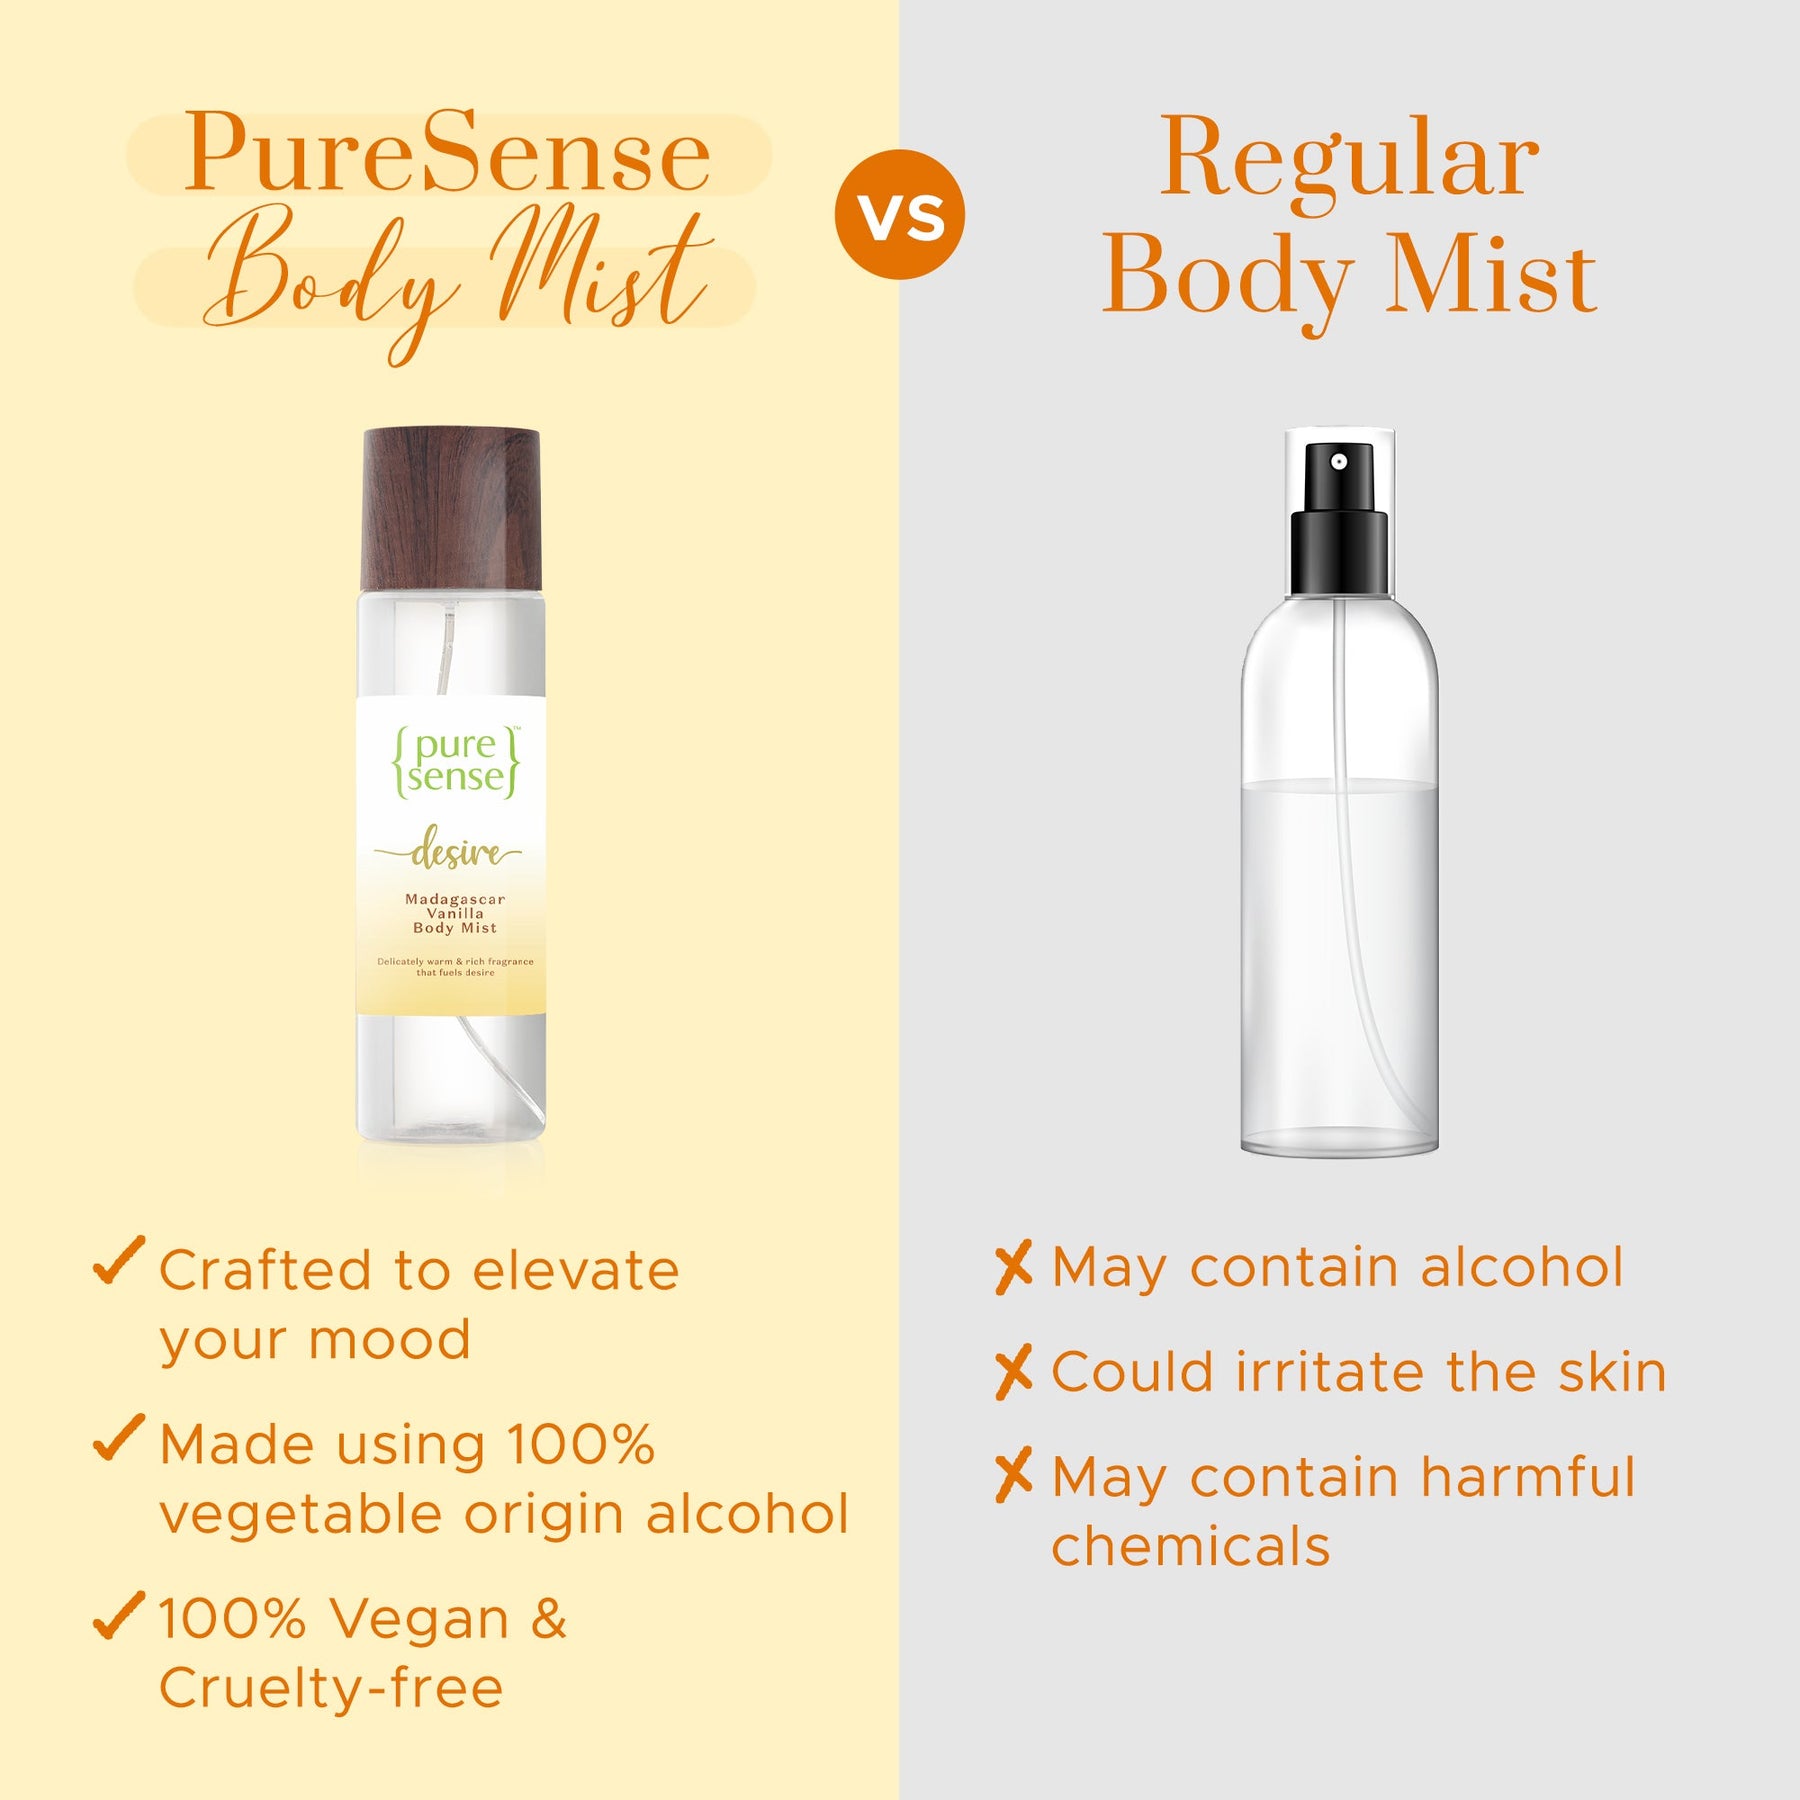 [CRED] Desire Madagascar Vanilla Body Mist (Pack of 2) | From the makers of Parachute Advansed | 300ml